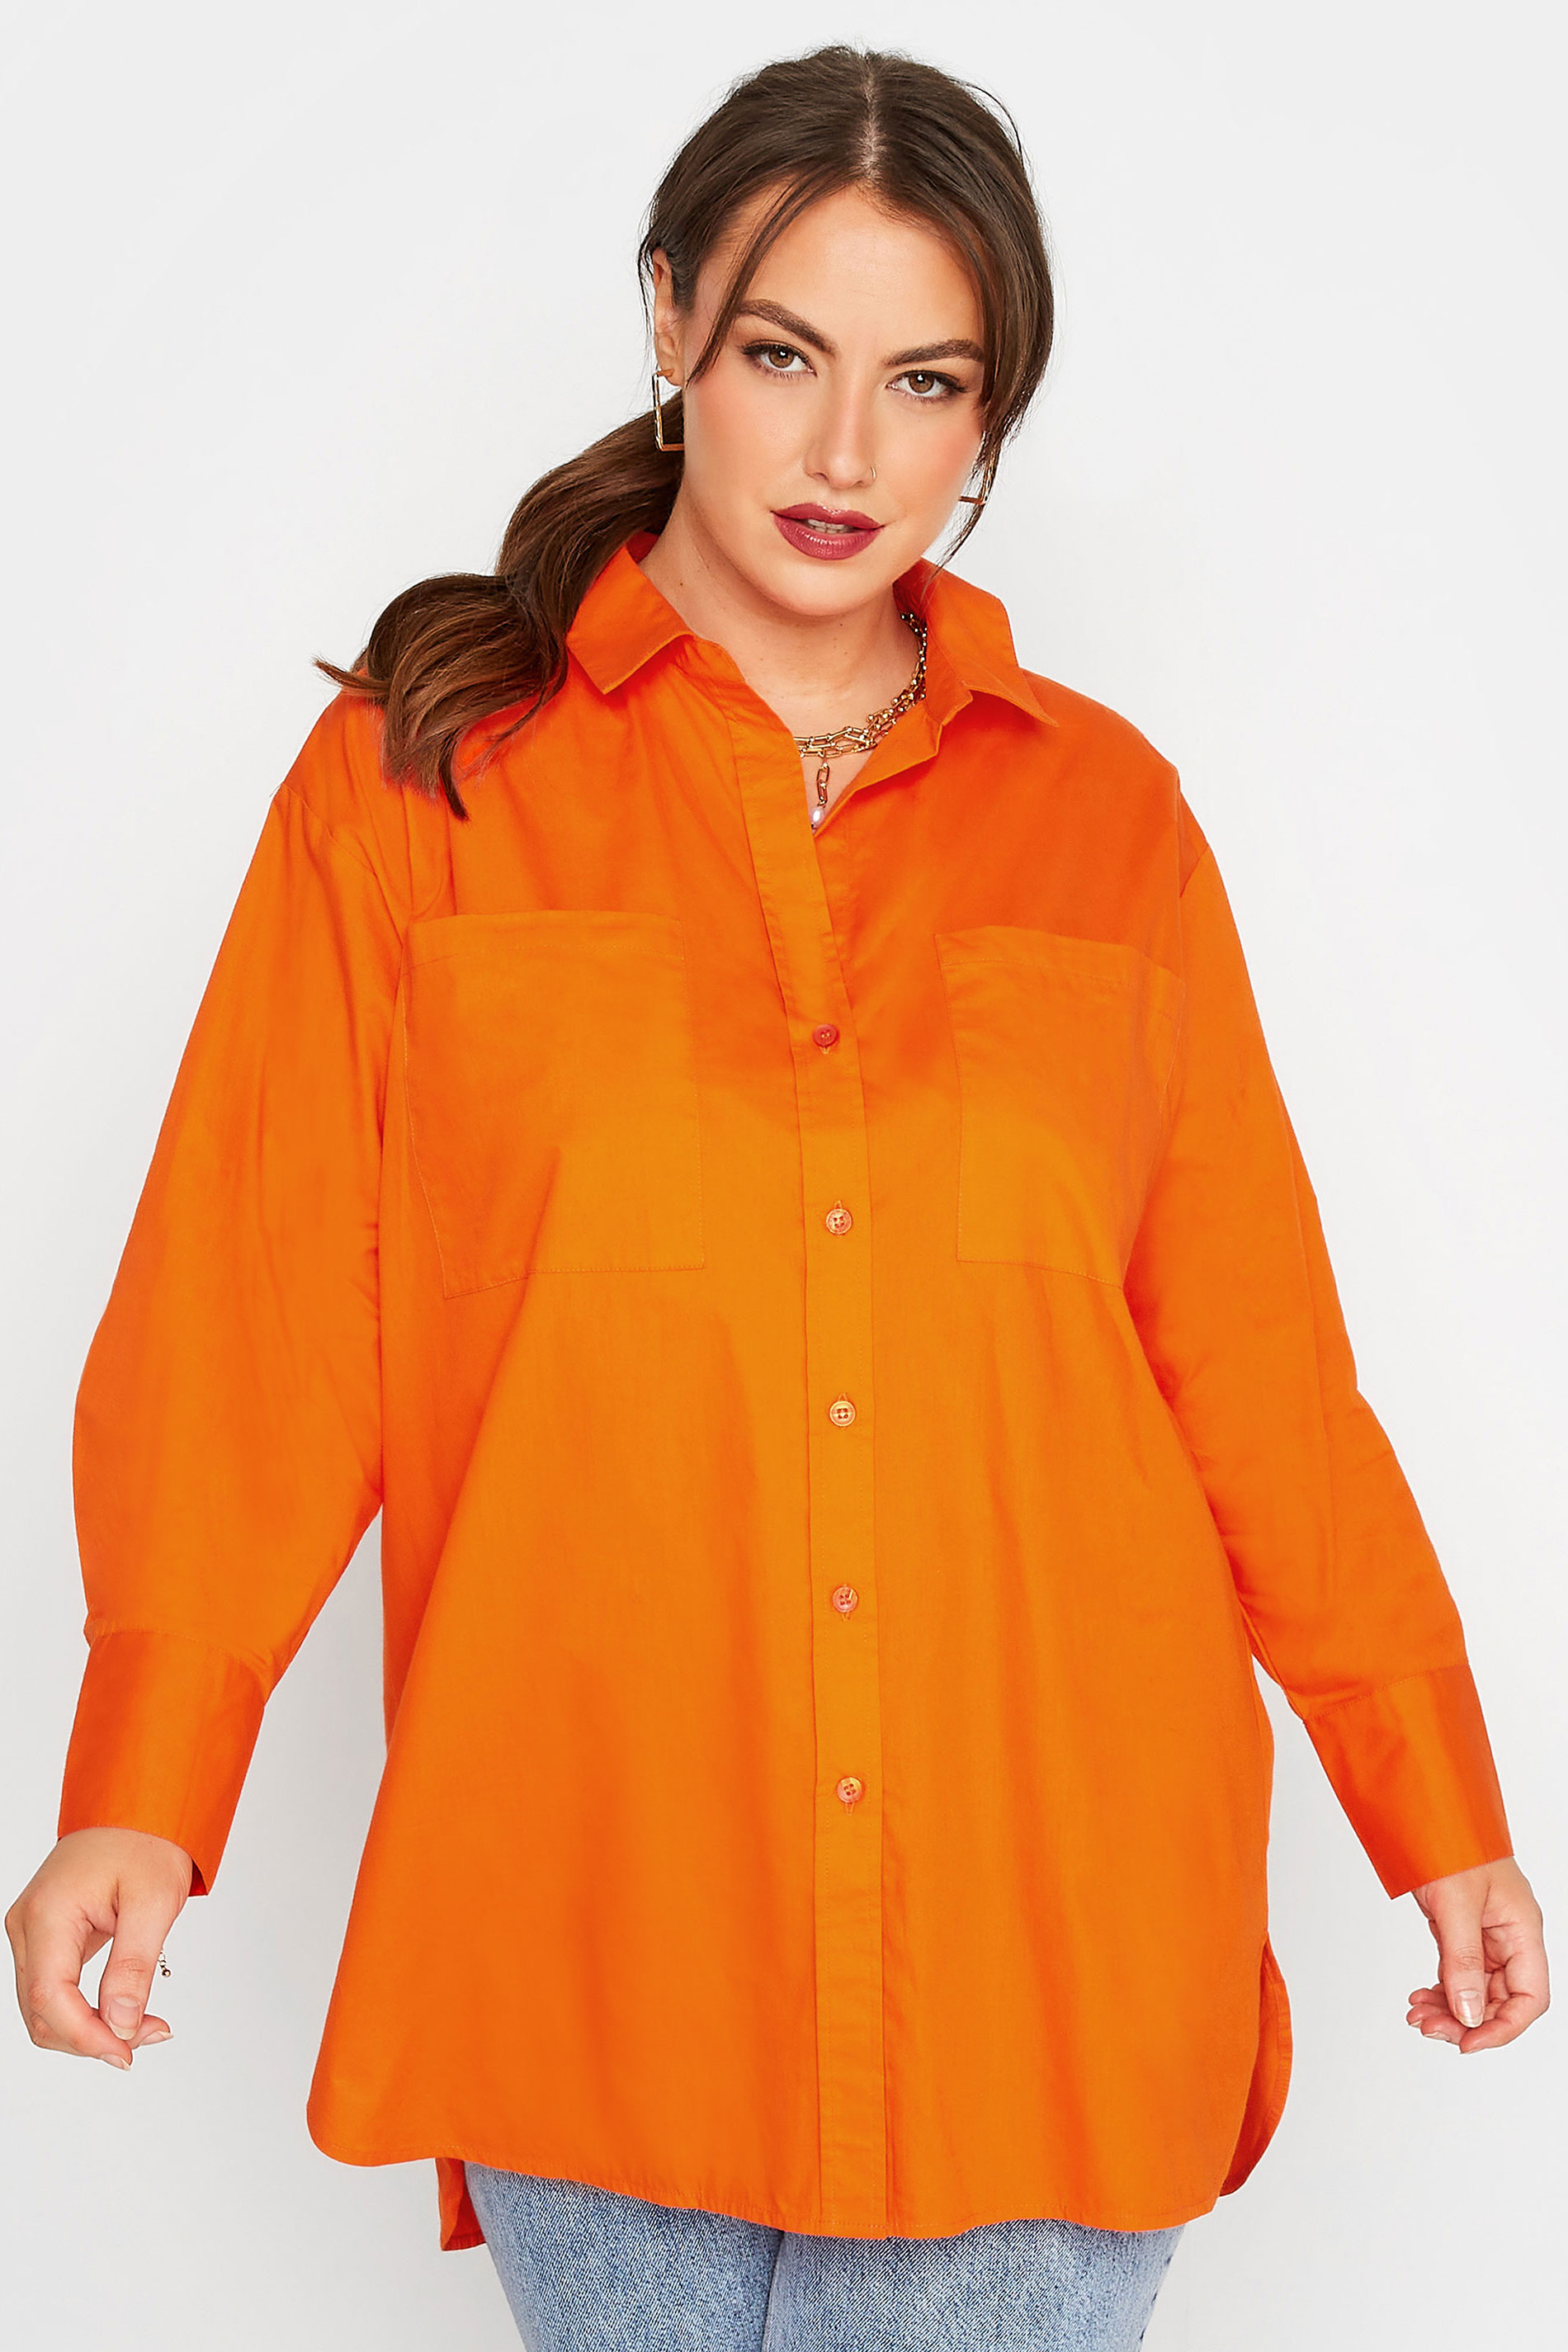 Grande taille  Blouses & Chemisiers Grande taille  Chemisiers | LIMITED COLLECTION - Chemisier Orange Oversize Boyfriend - YQ93090